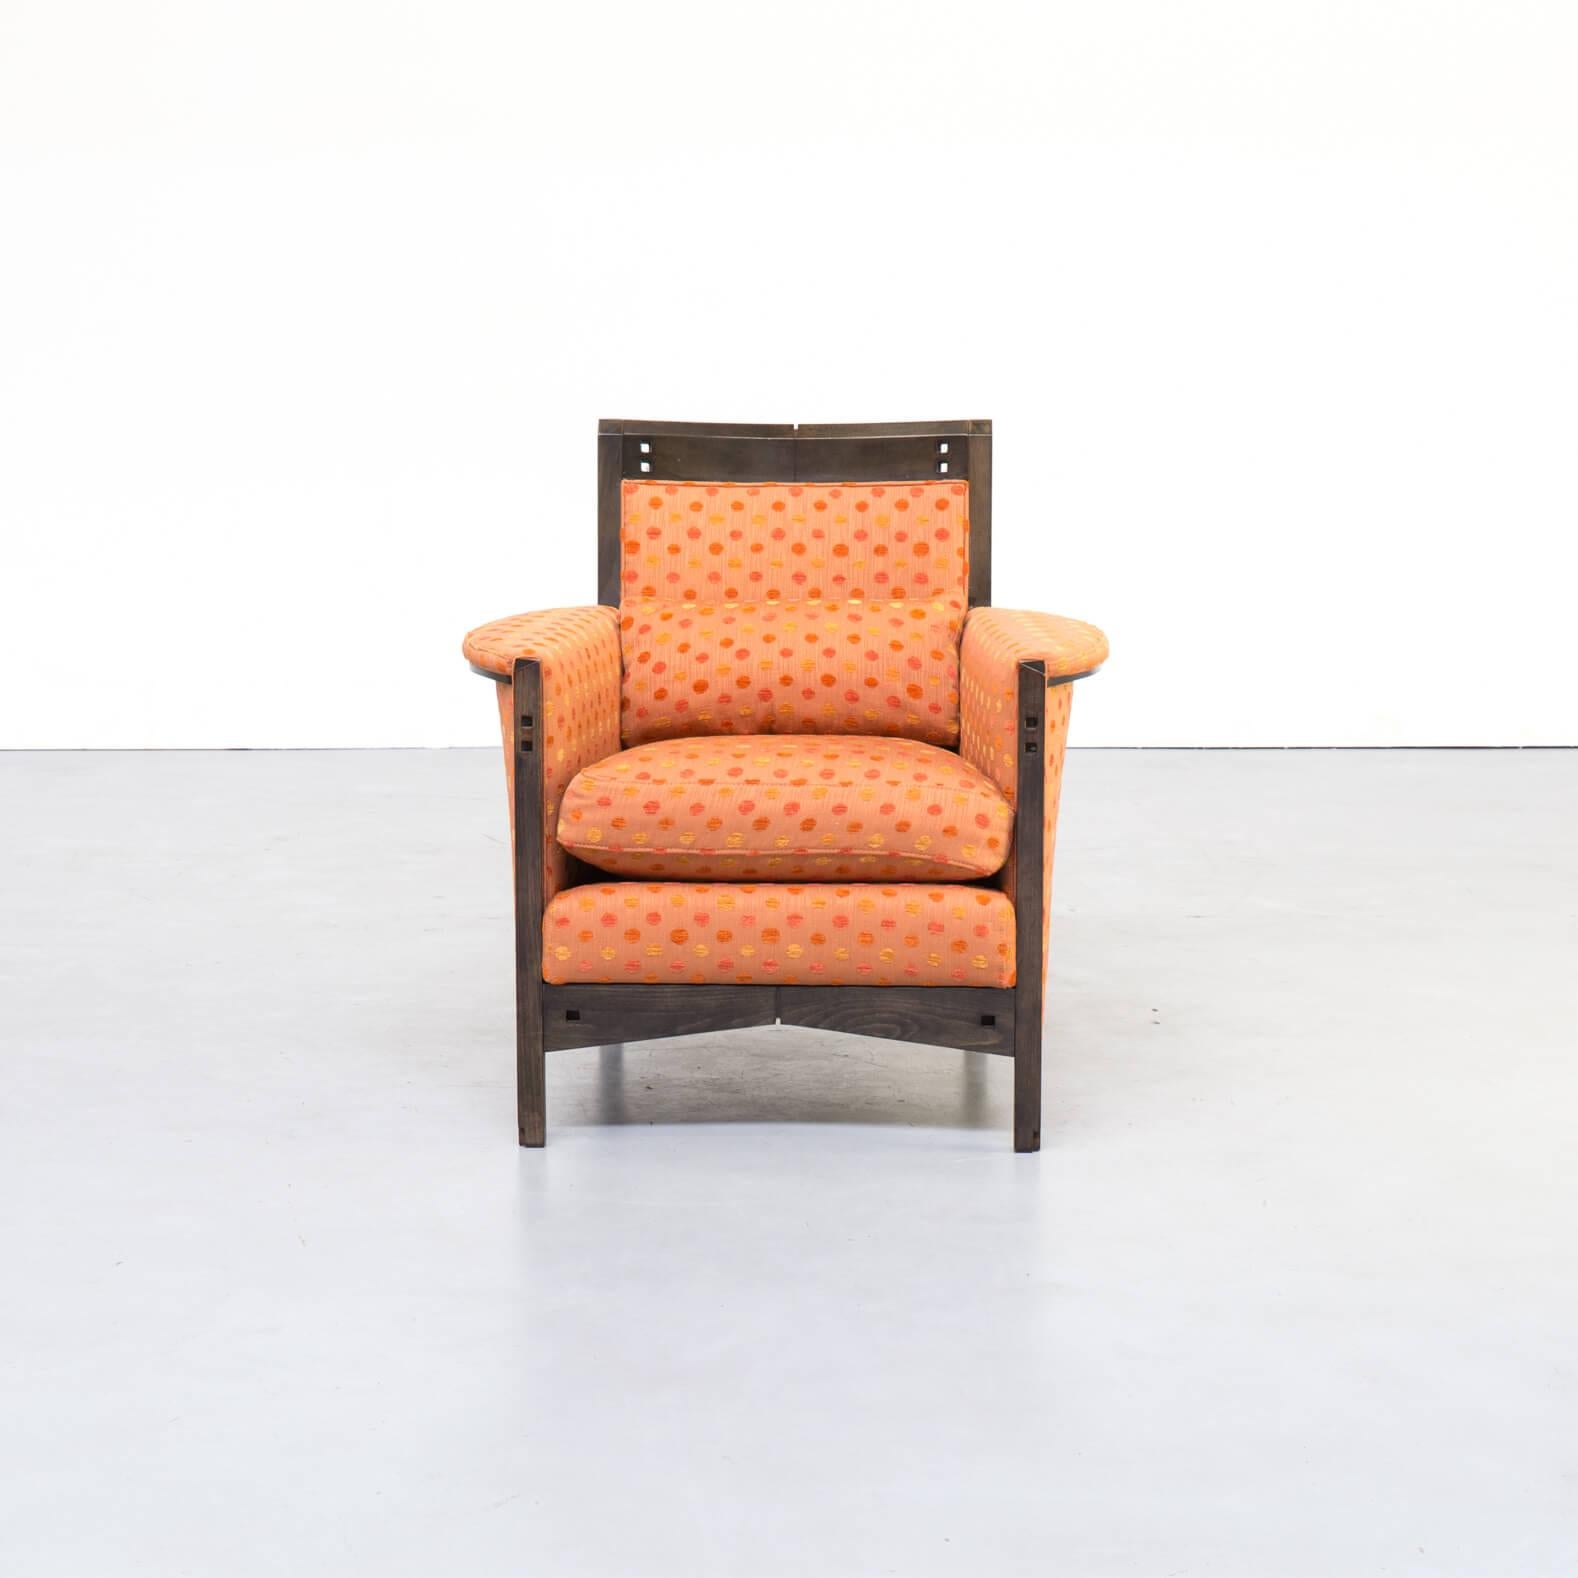 Beautiful and very comfortable lounge chair designed by Umberto Asnago for Giorgetti in the 1990s. Orange fabric, darkened beech wooden frame. Good condition consistent with age and use.